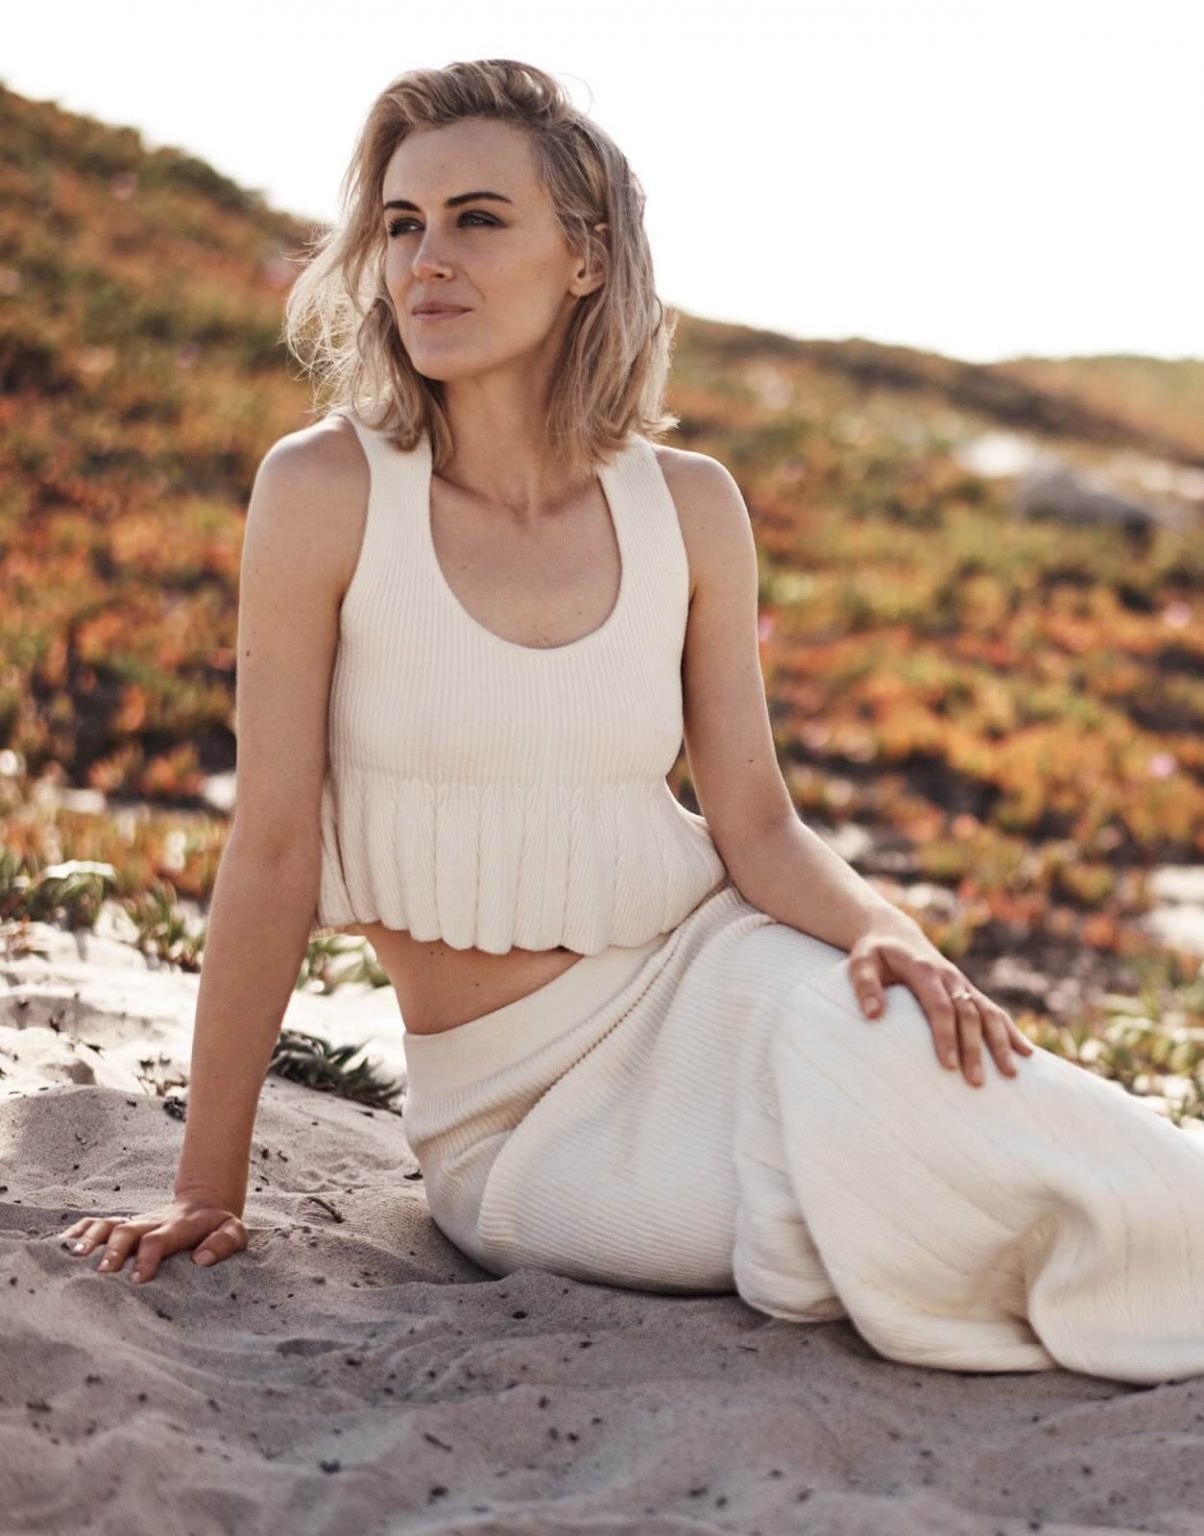 The Hottest Taylor Schilling Photos Around The Net.